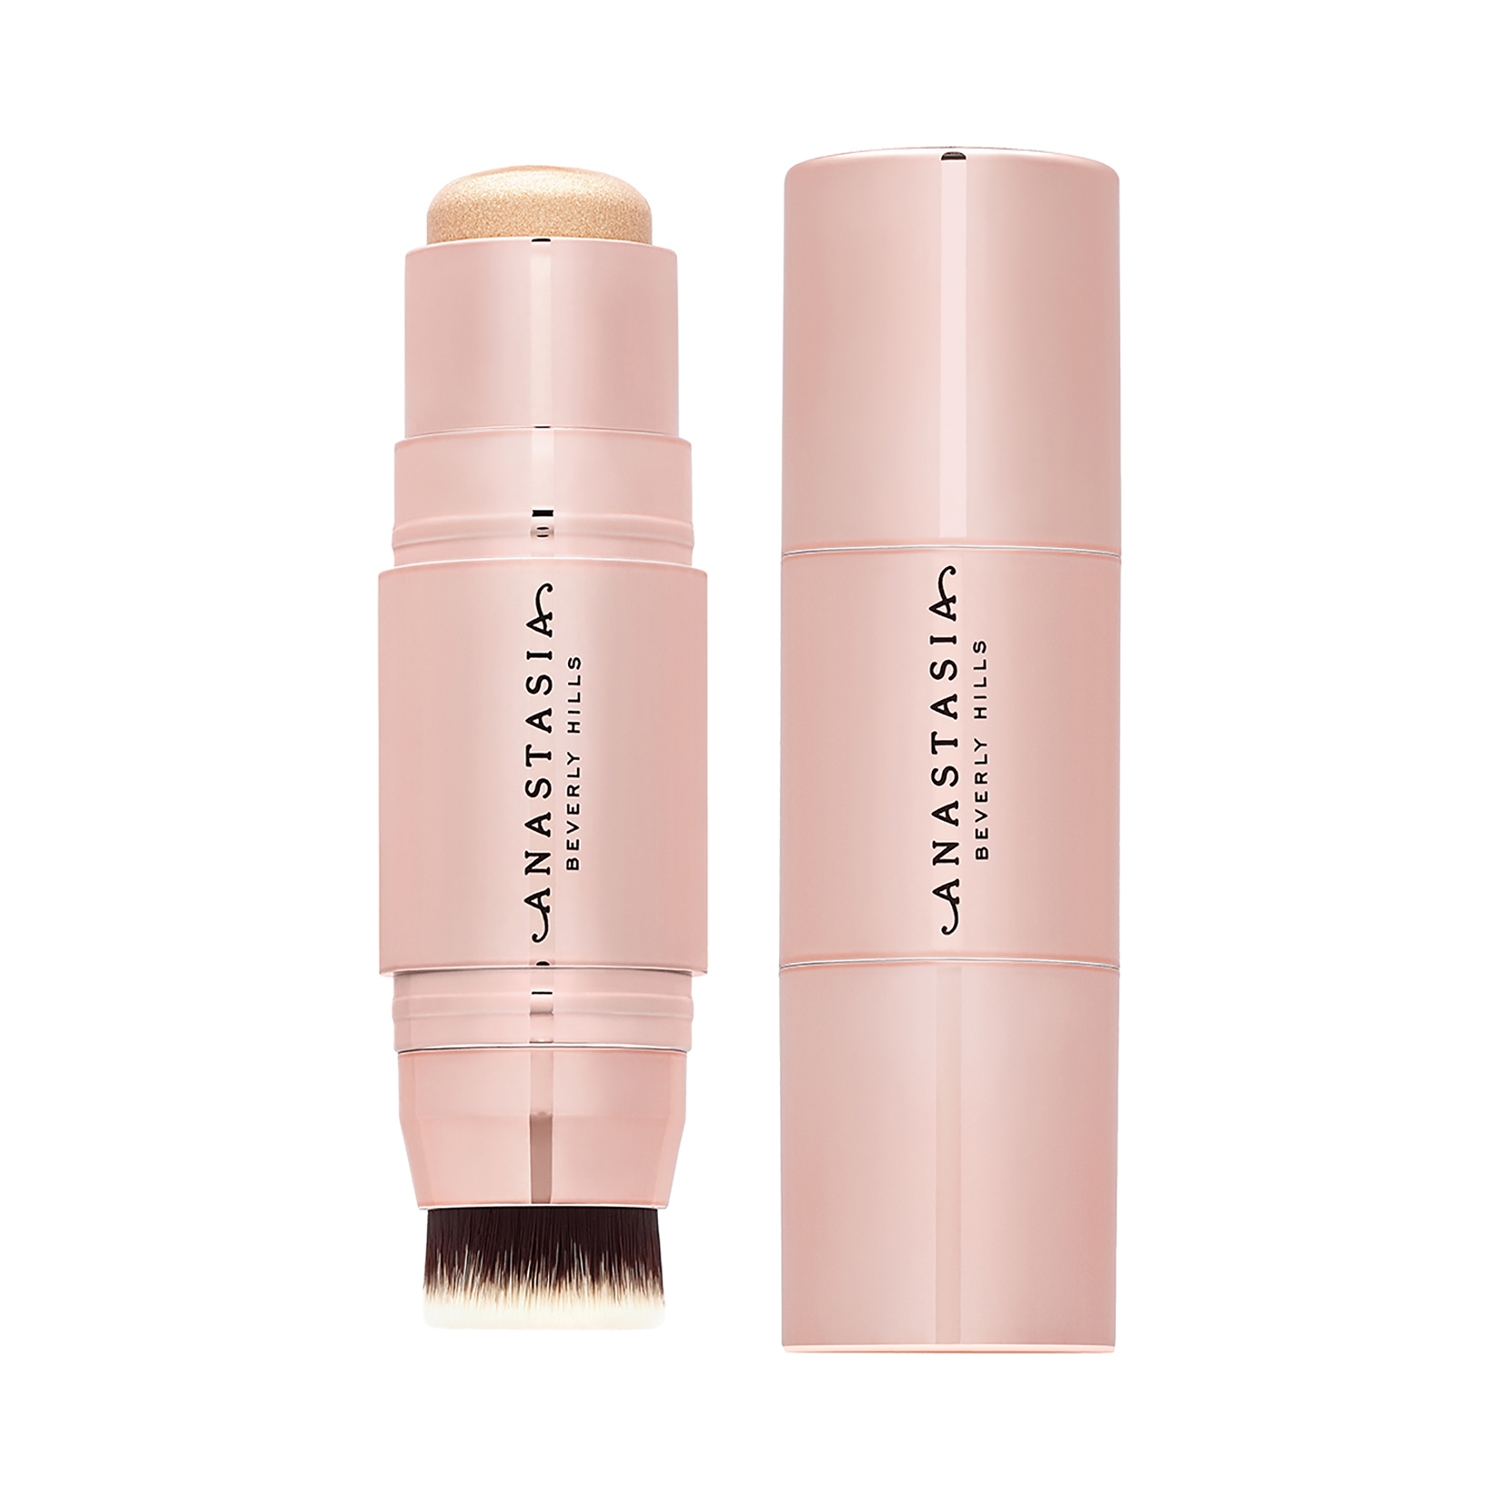 Anastasia Beverly Hills | Anastasia Beverly Hills Stick Highlighter - Dripping in Gold (8g)